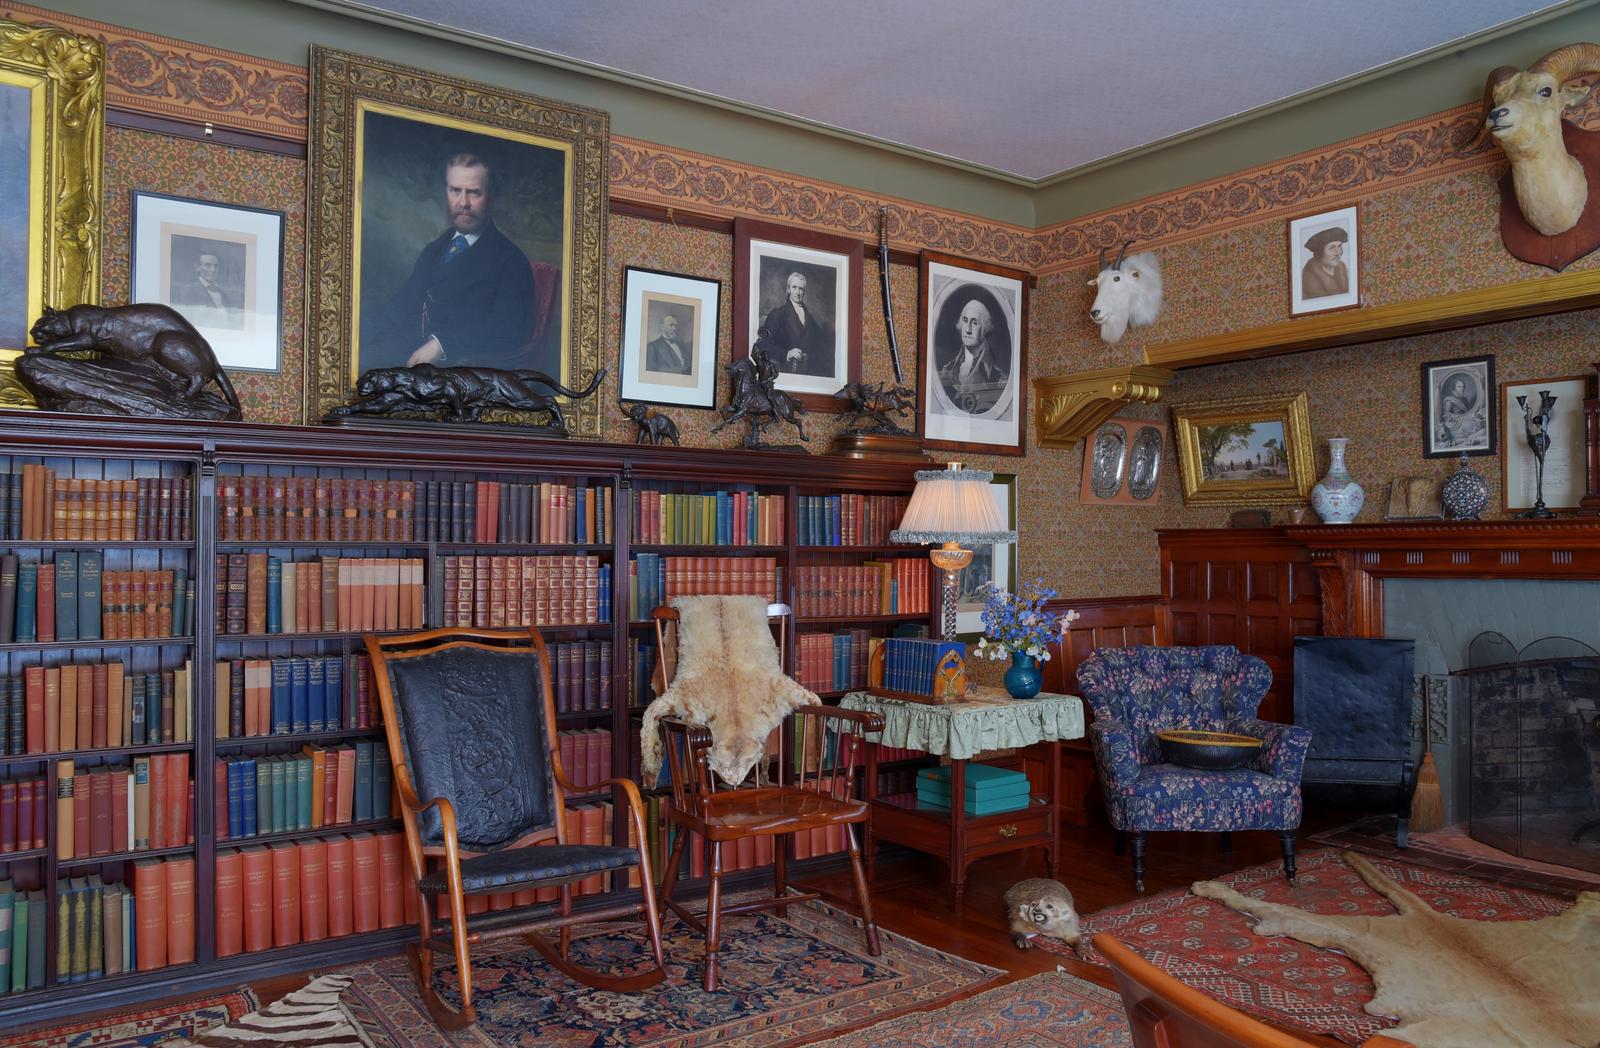 A room with books, paintings, hunting trophies, chairs, and a fireplace.The library.